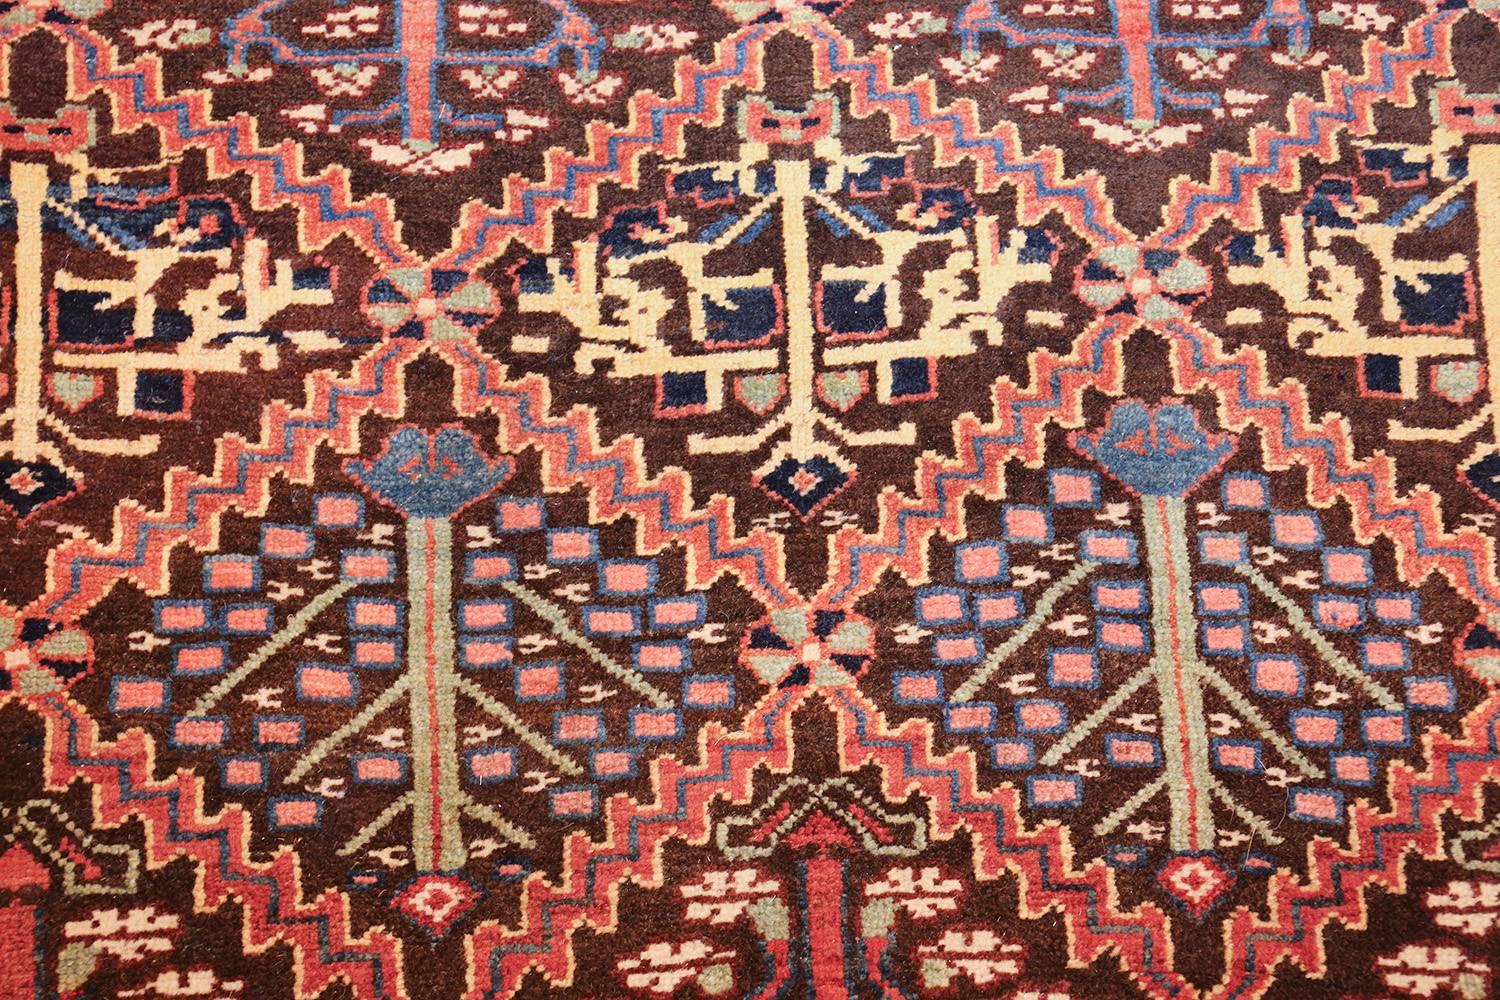 Antique Persian Shrub Design Bidjar Carpet. 4 ft 1 in x 12 ft 6 in In Excellent Condition For Sale In New York, NY